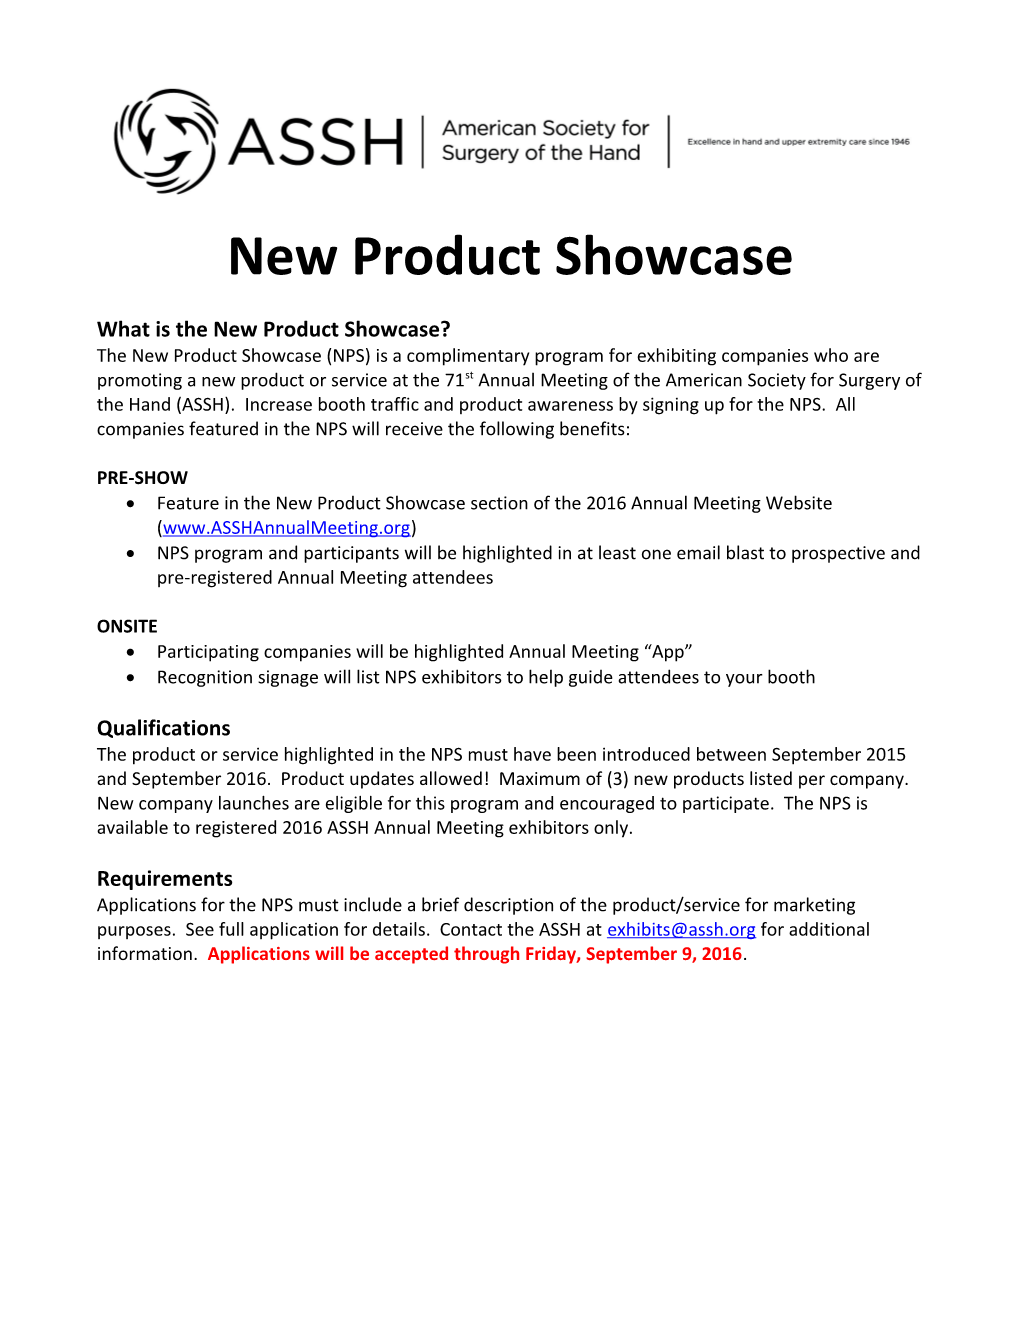 What Is the New Product Showcase?